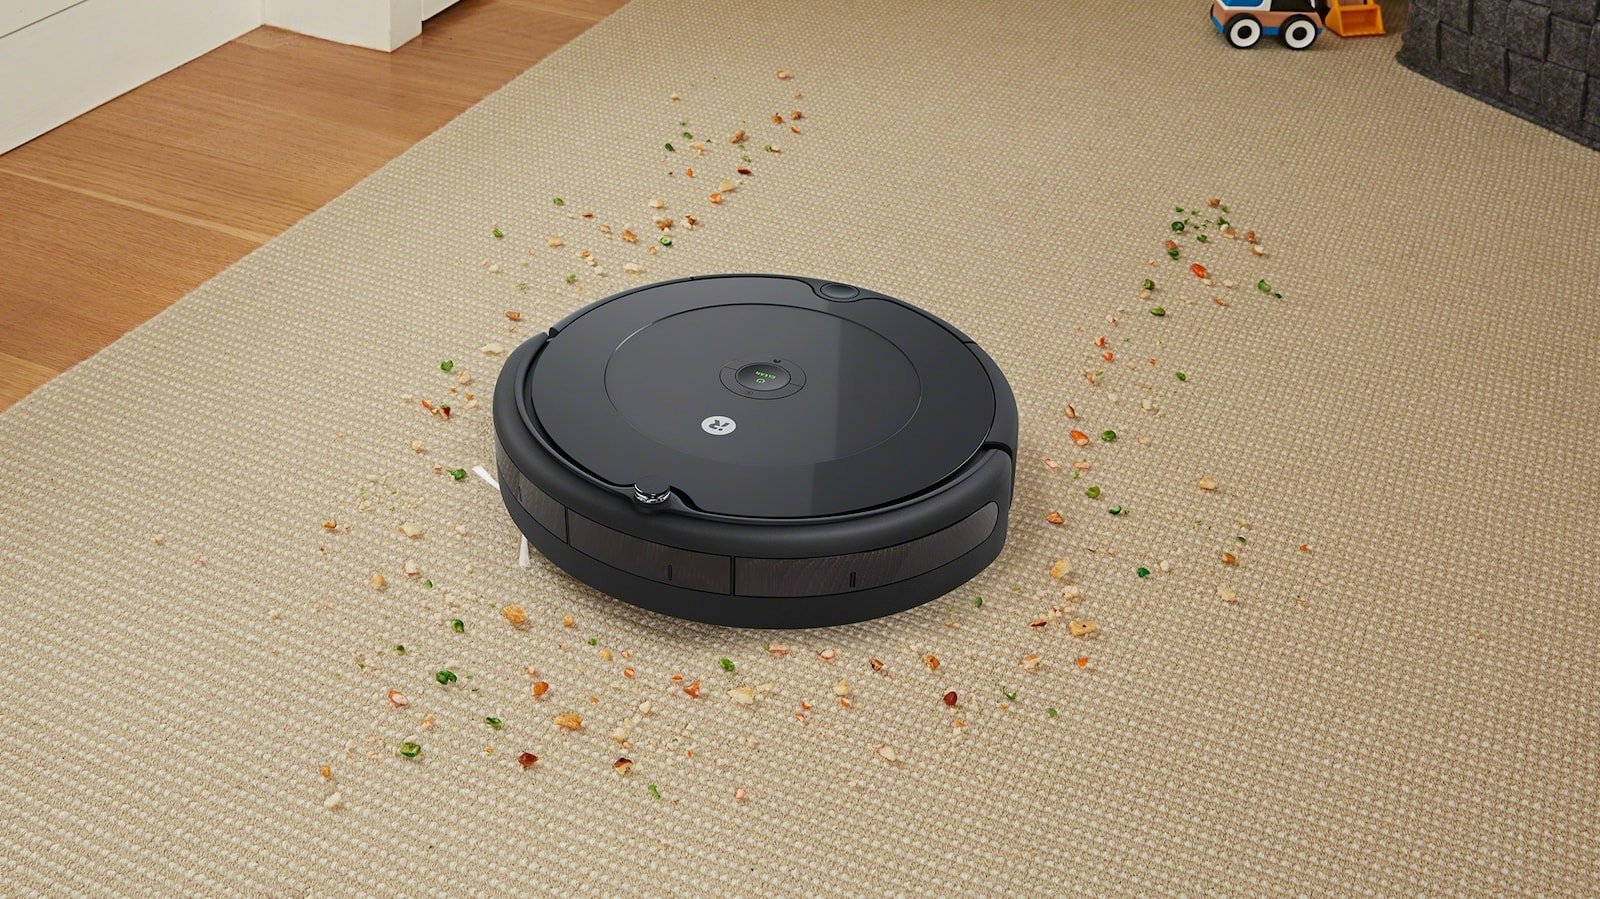 iRobot Roomba 694 robot vacuum has the 3-stage cleaning system and a stylish look